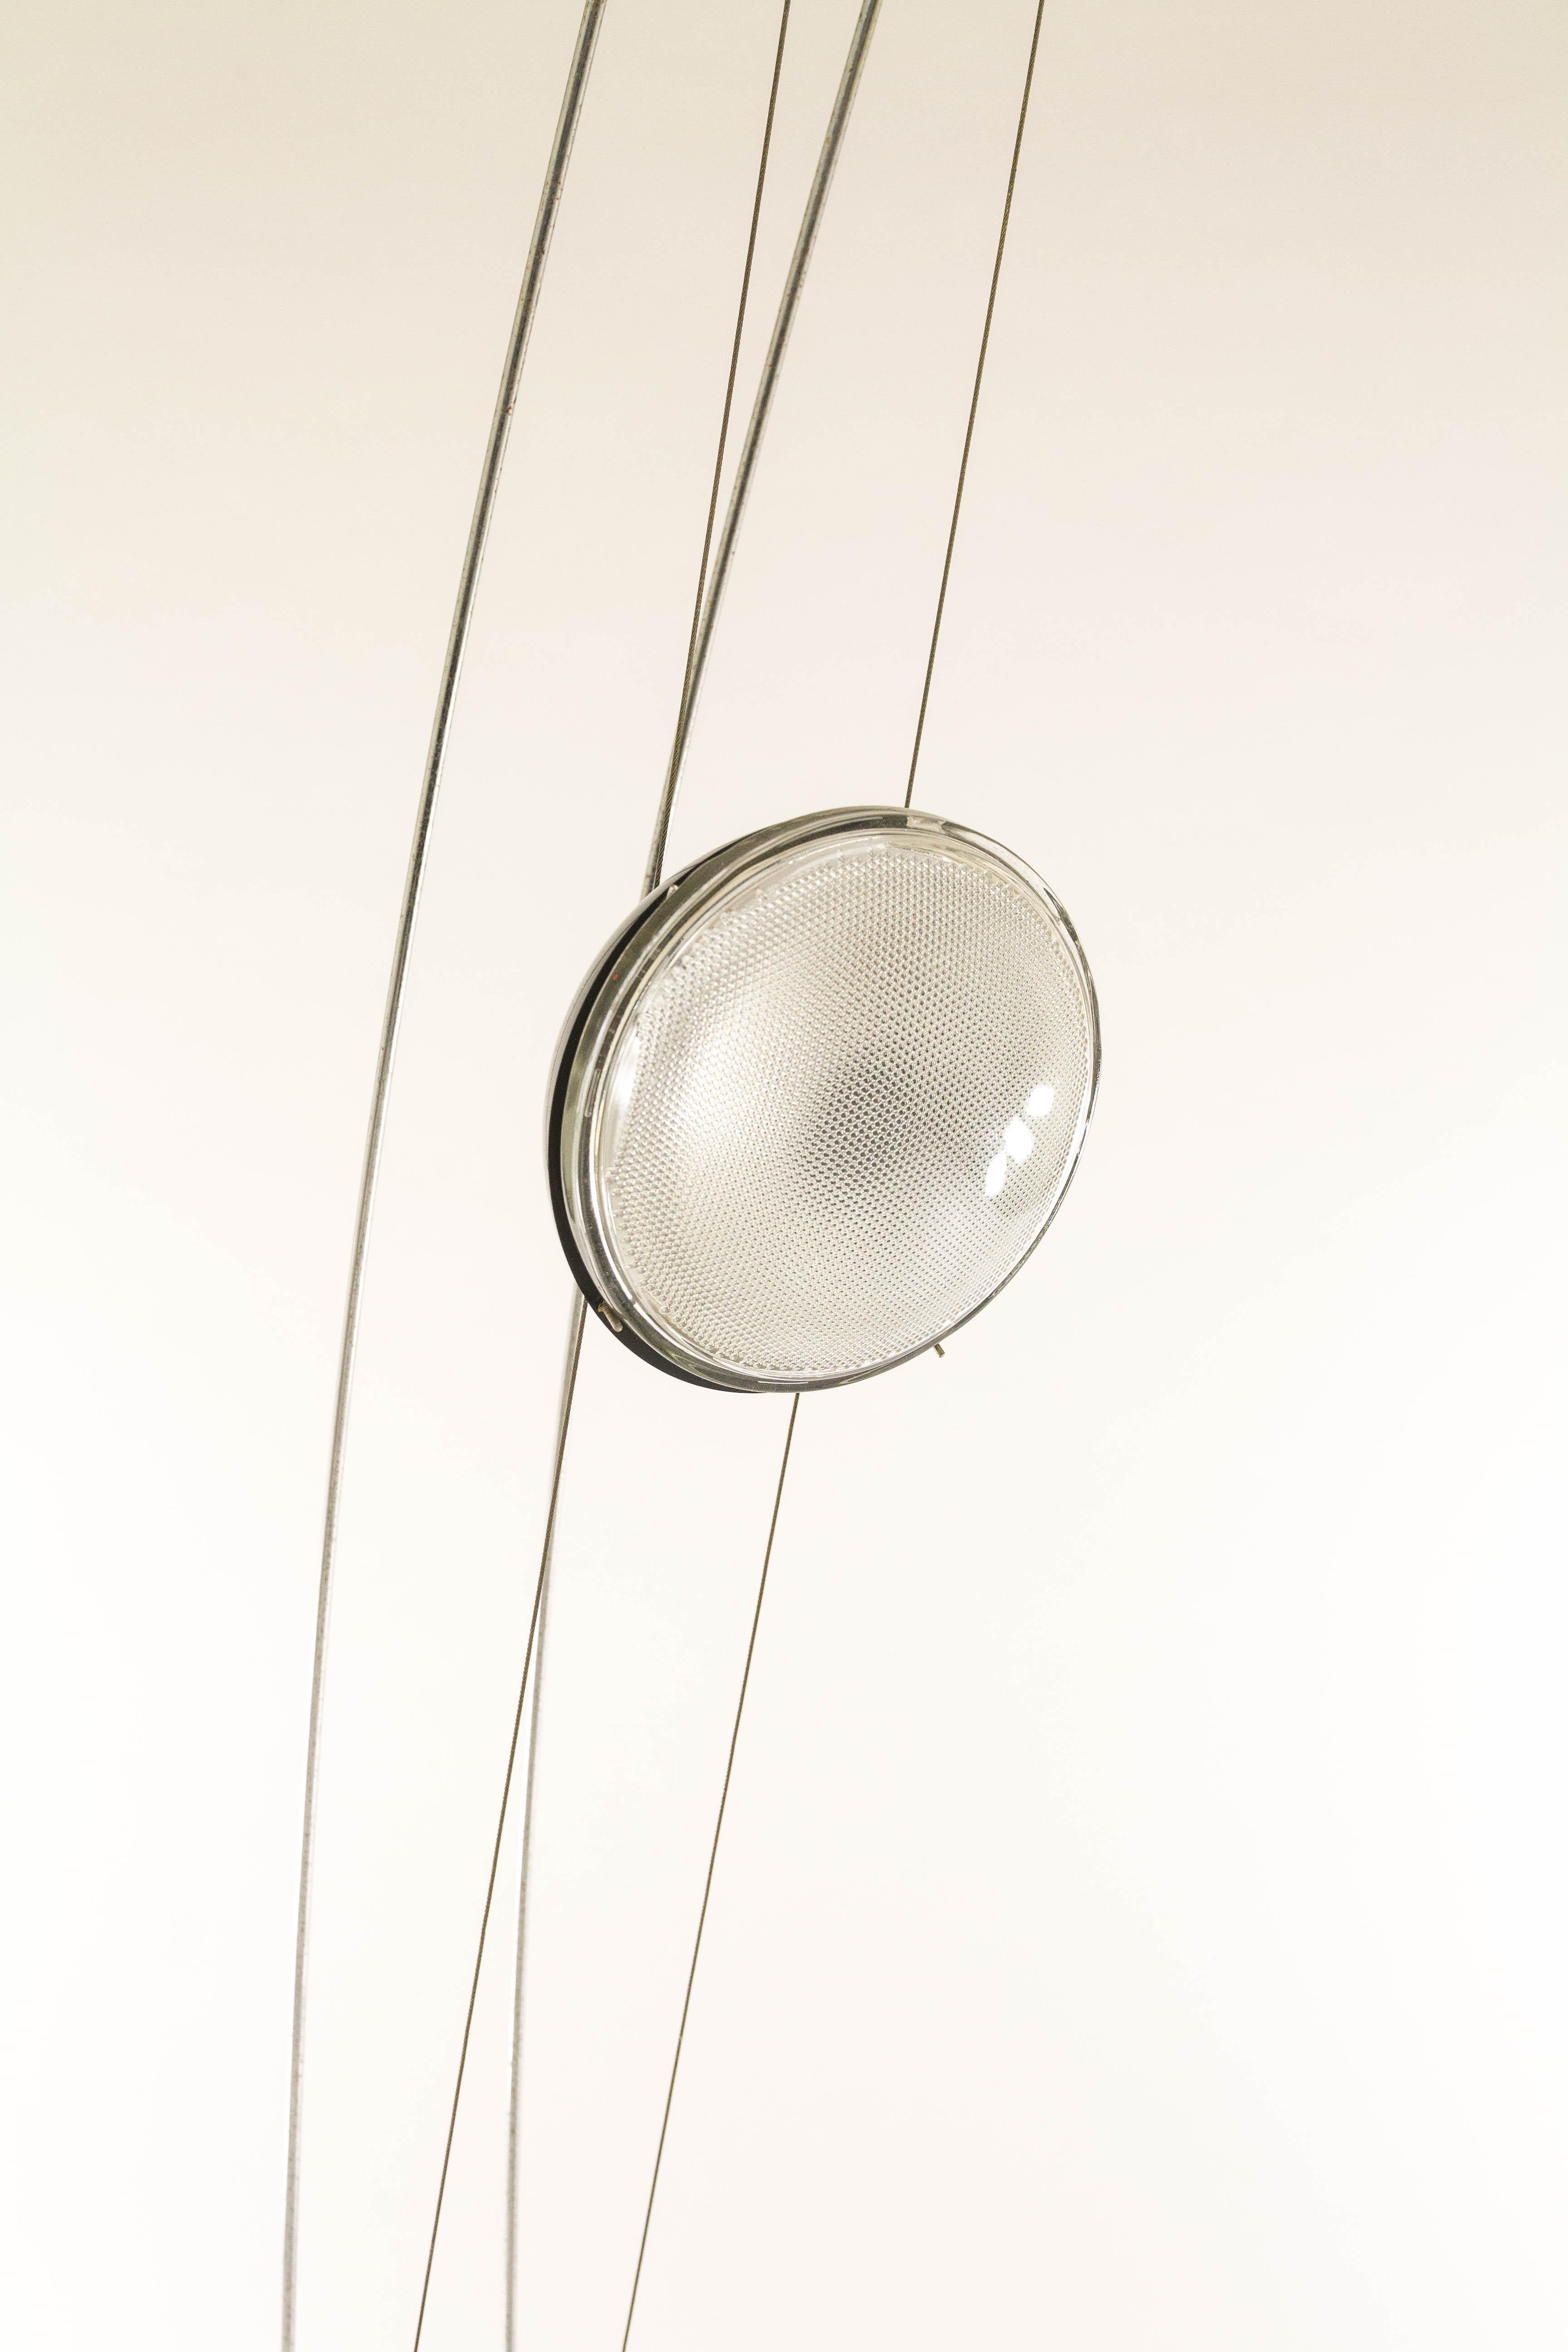 Late 20th Century Lighting Sculpture 'Arco-nero' Designed by Axel Meise for AML Licht + Design